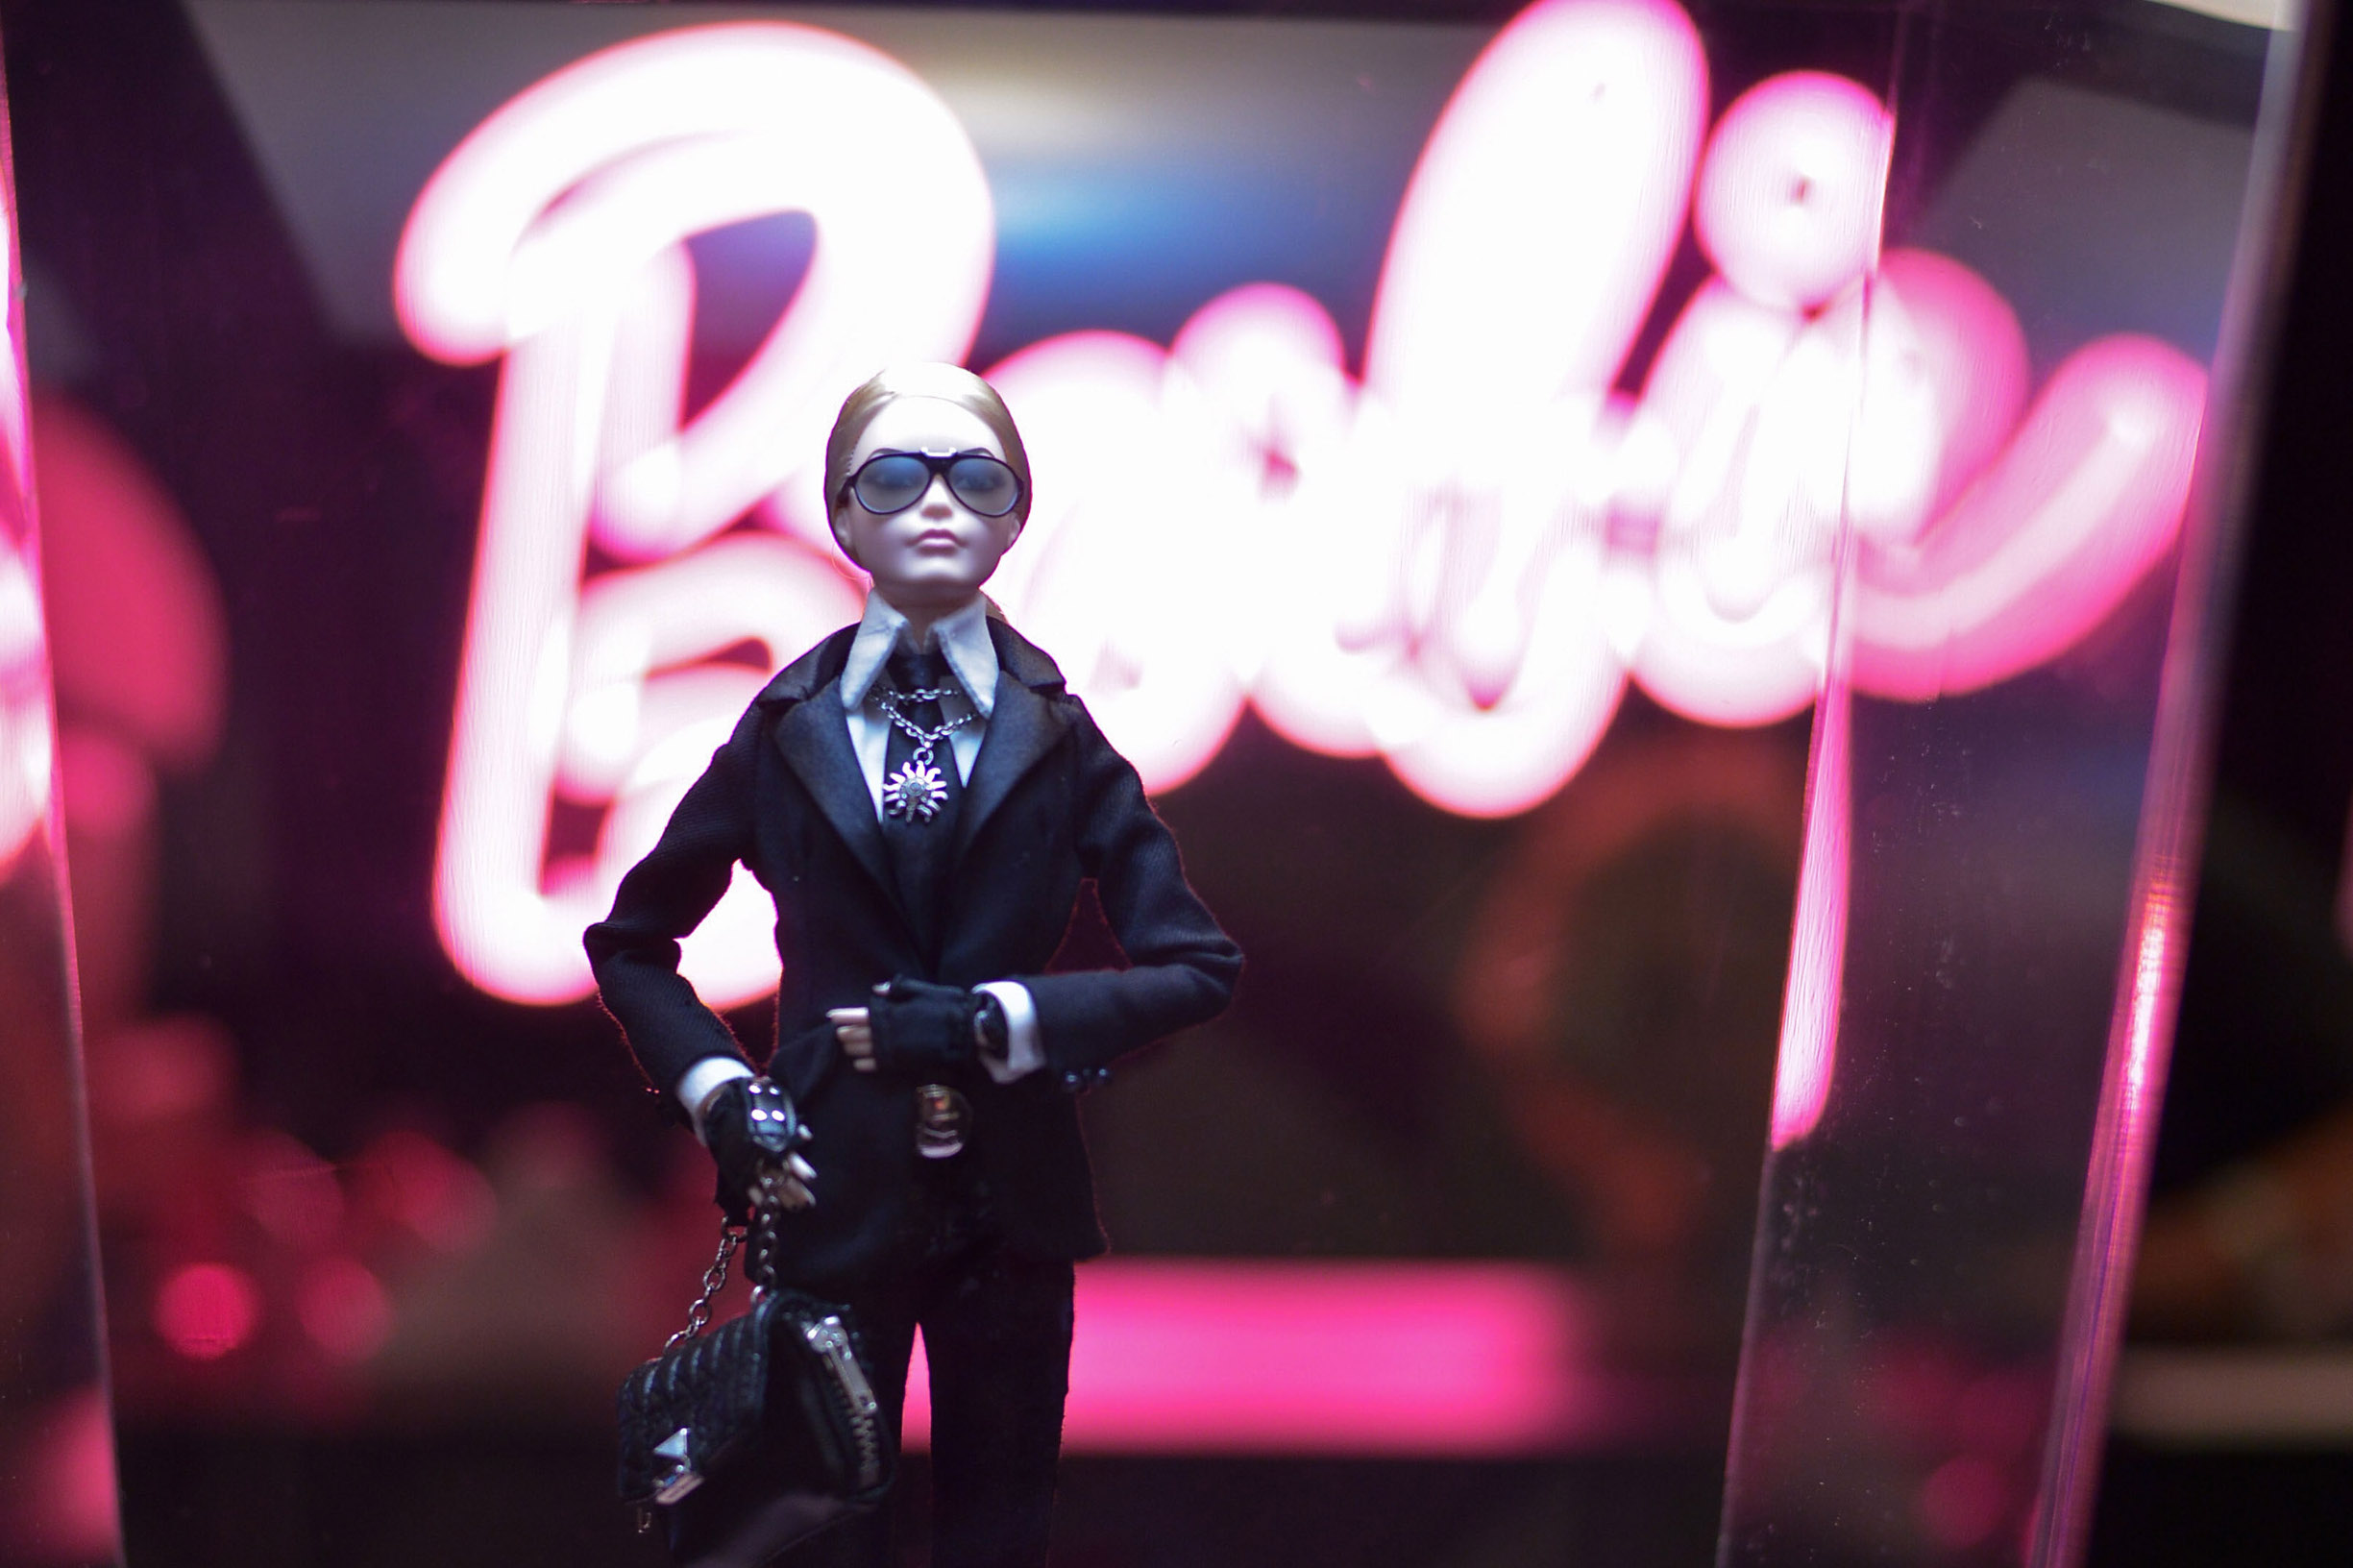 SAO PAULO, BRAZIL - NOVEMBER 03:  A Barbie Doll is displayed in the Barbie Experience during Sao Paulo Fashion Week Winter 2015 at Porao das Artes on November 3, 2014 in Sao Paulo, Brazil.  (Photo by Studio Fernanda Calfat/Getty Images)